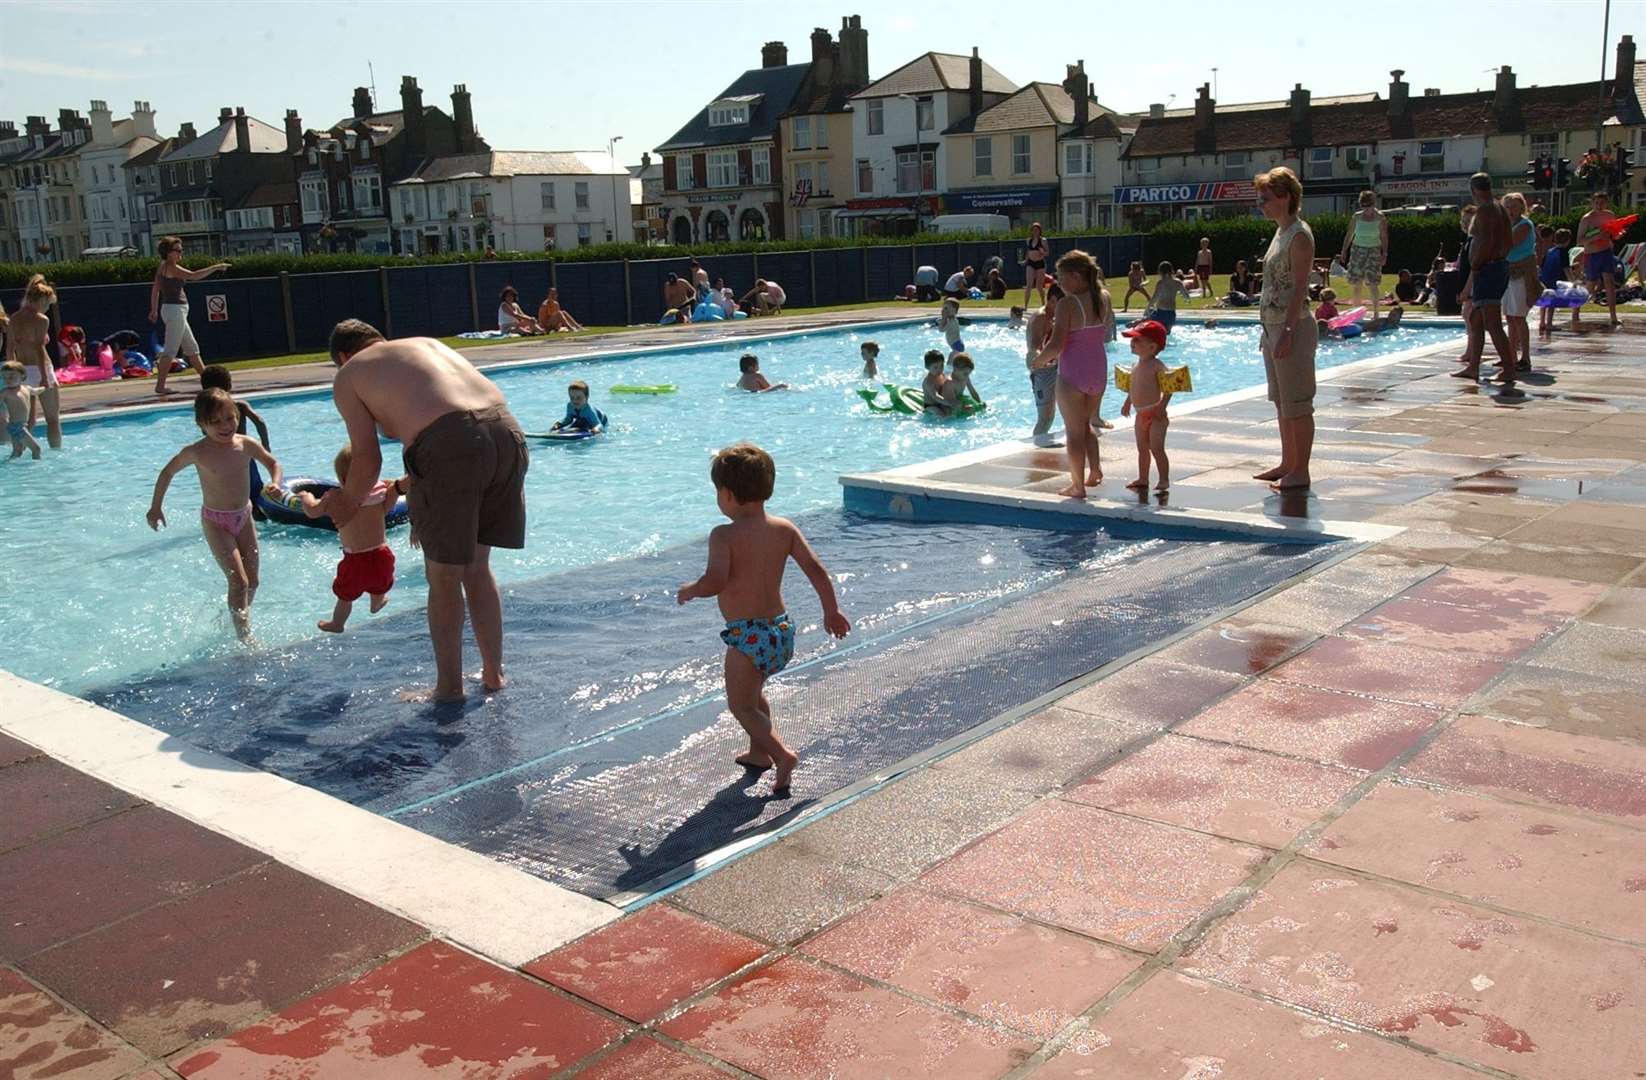 Walmer Paddling pool has long been an attraction for families. This picture was taken in 2005.